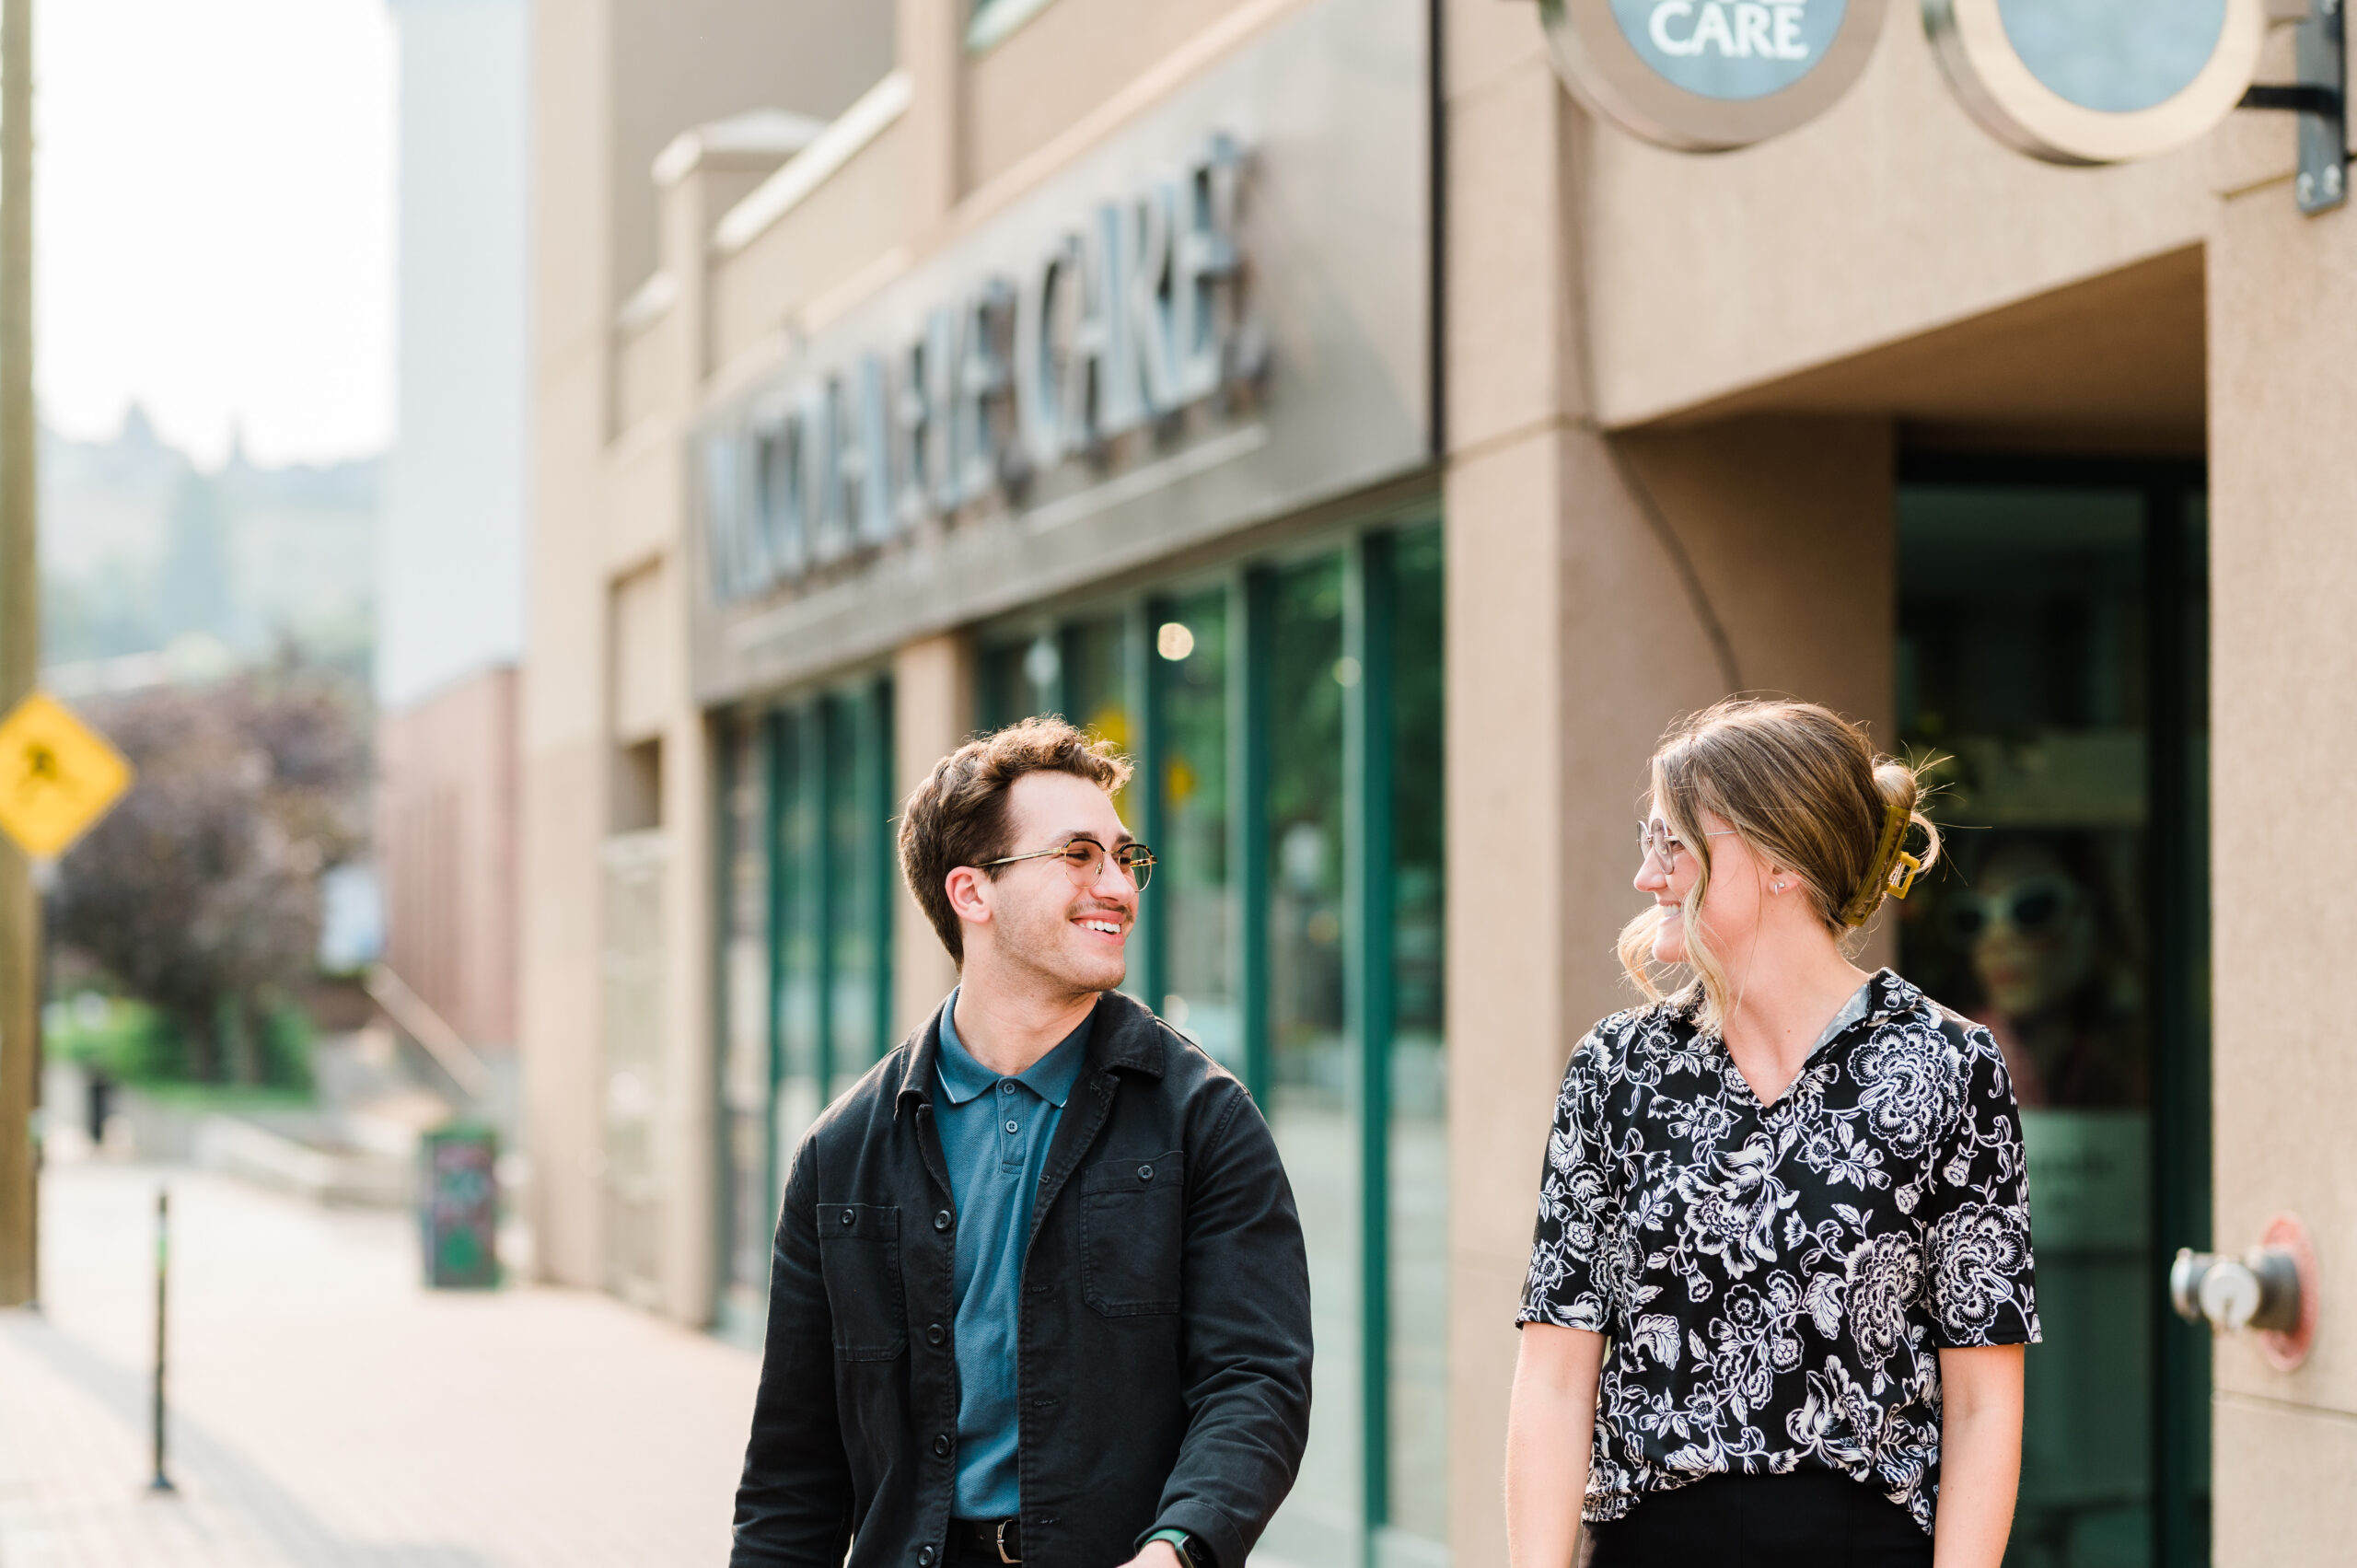 A man and a woman stand smiling outside Nicola Eye Care, a premium eye clinic in Kamloops